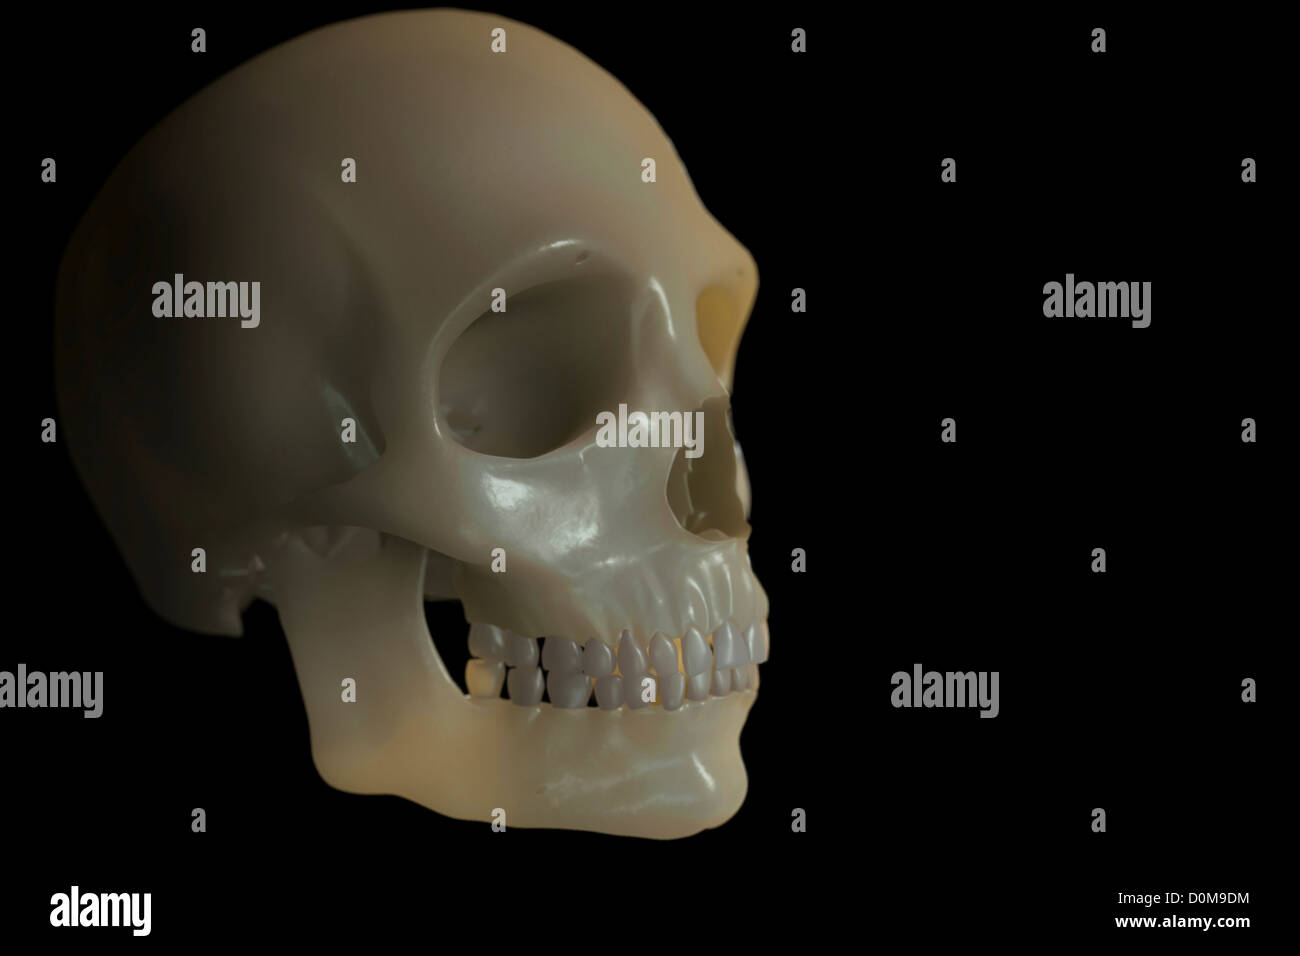 The human skull as seen from a front three quarter view. The skull has a wax like appearance. Stock Photo